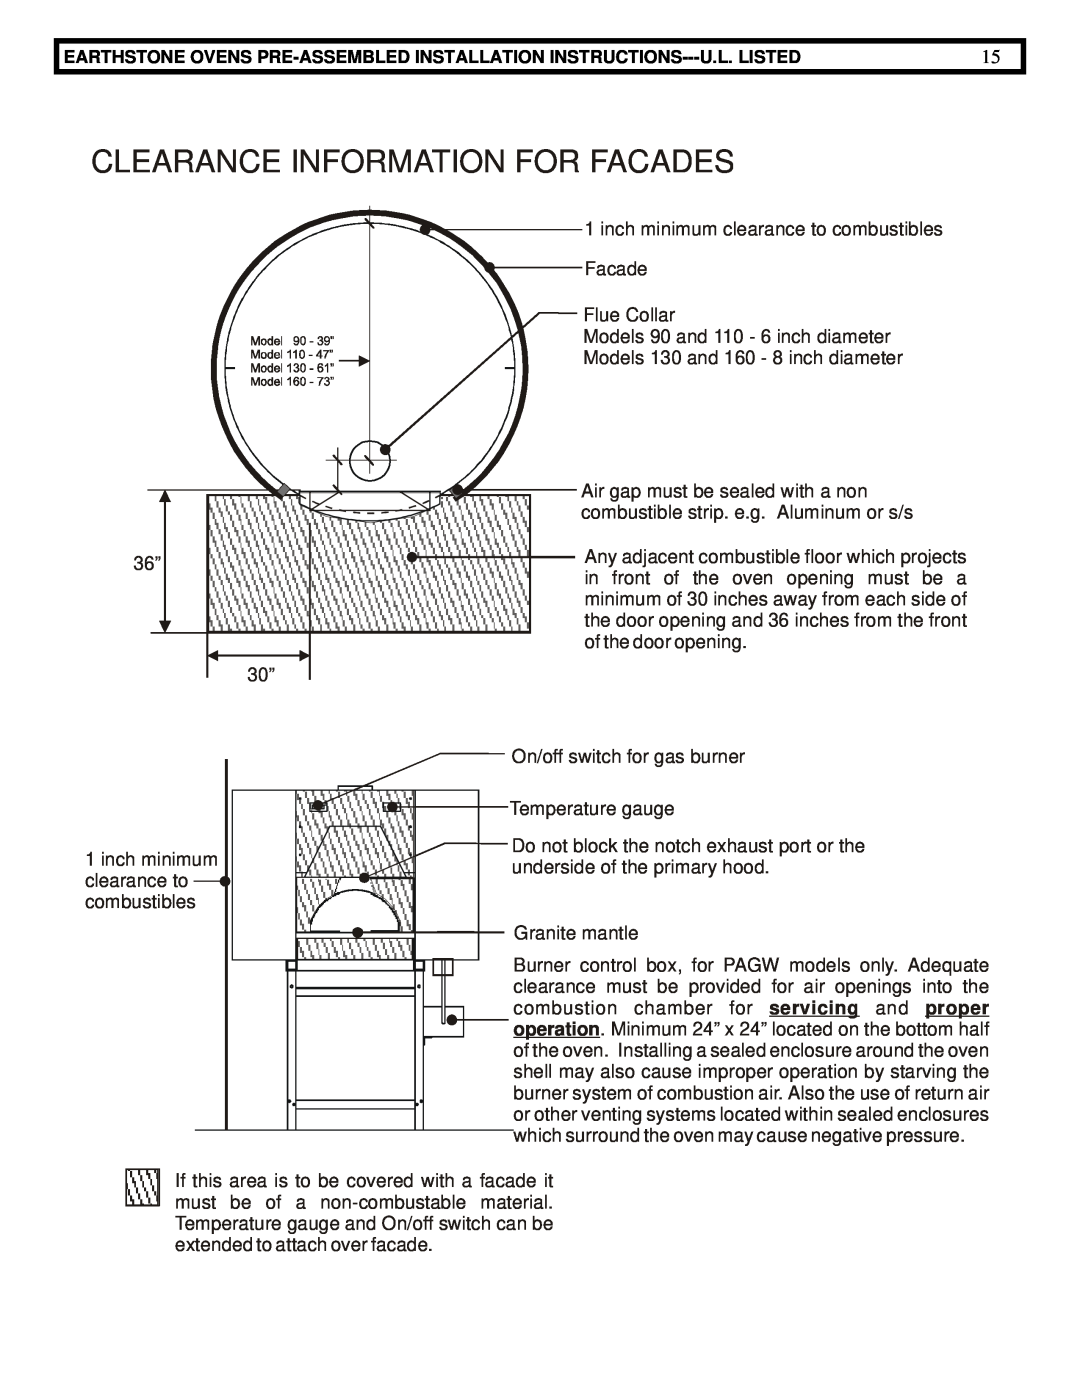 EarthStone woofire oven installation instructions Clearance Information For Facades 